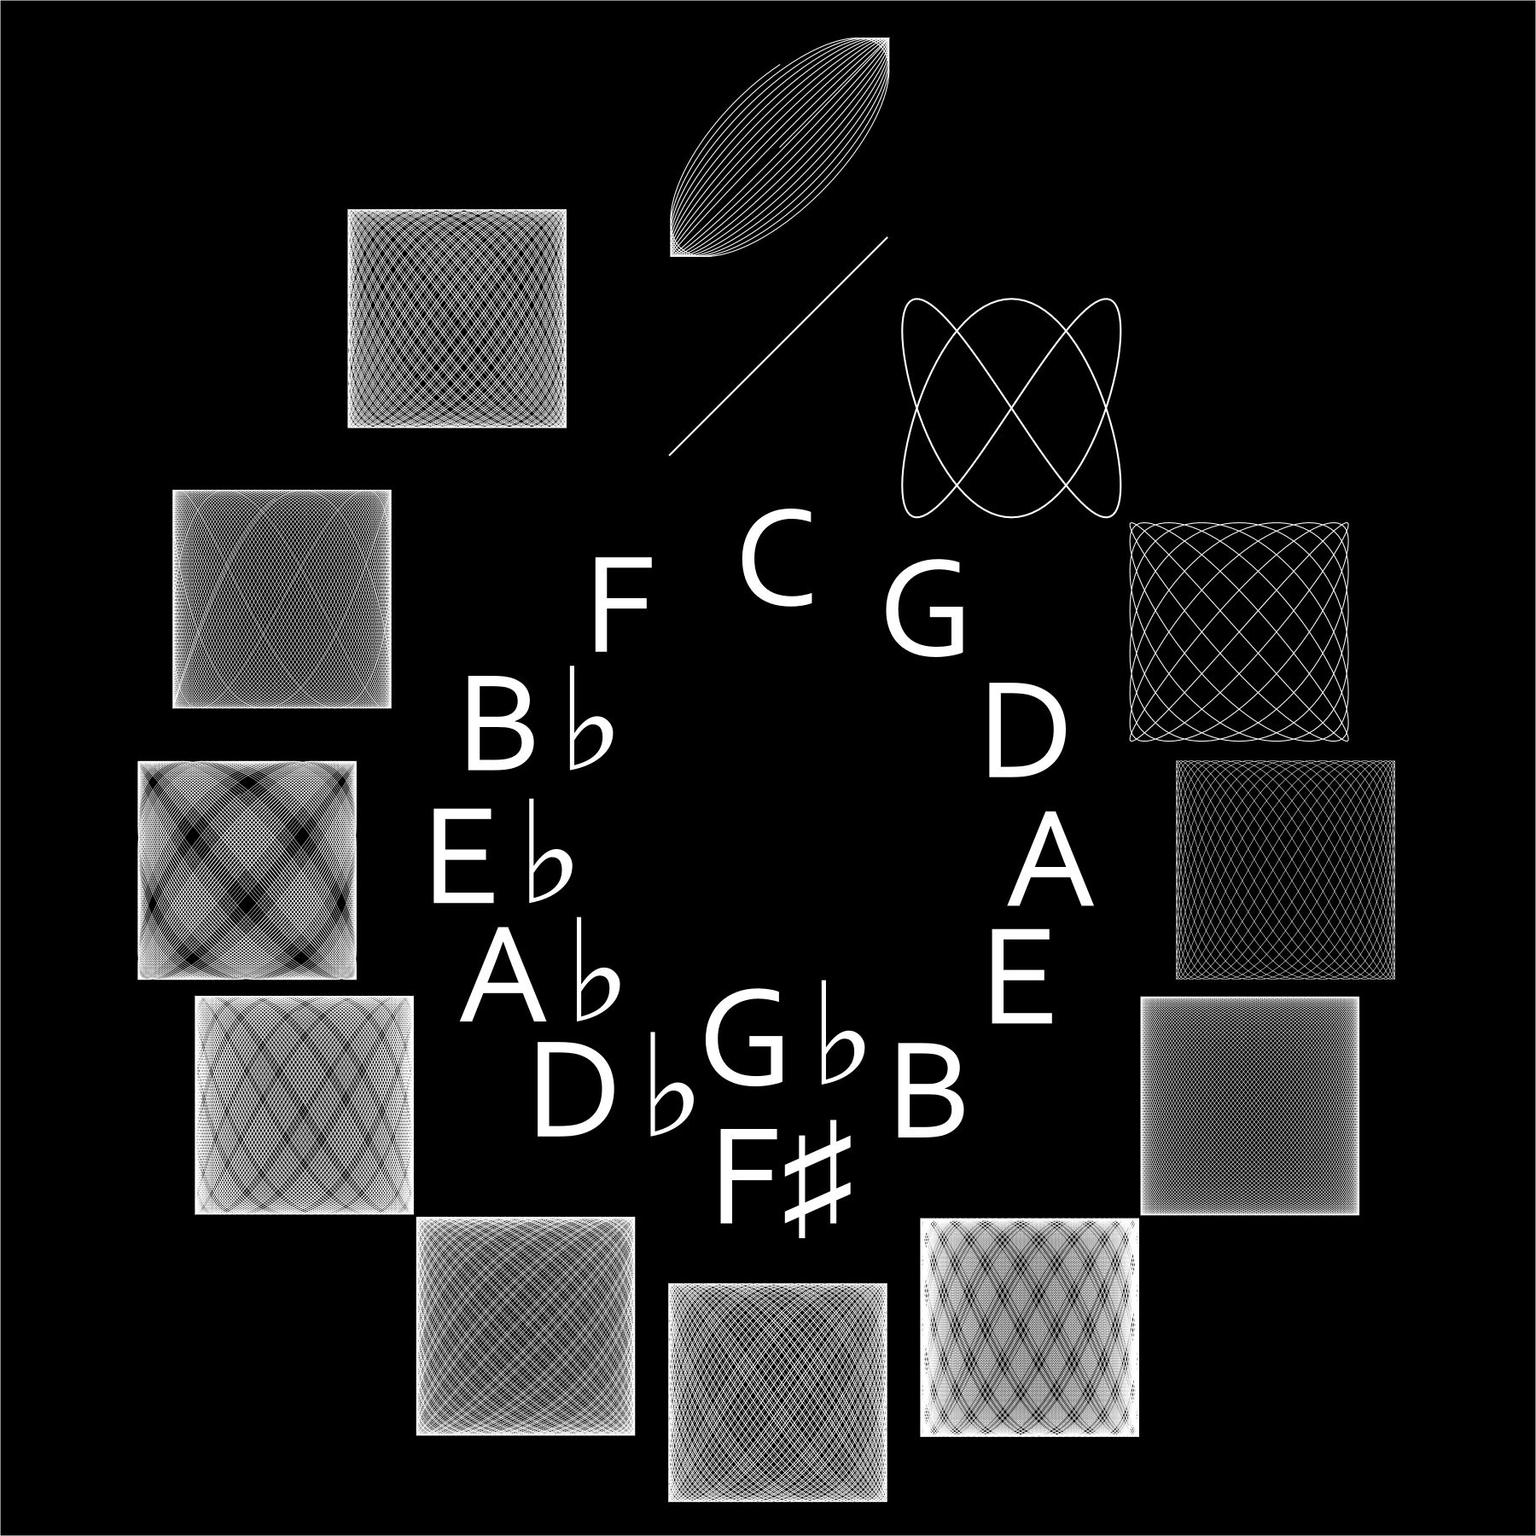 Image for entry 'Circle of Fifths'